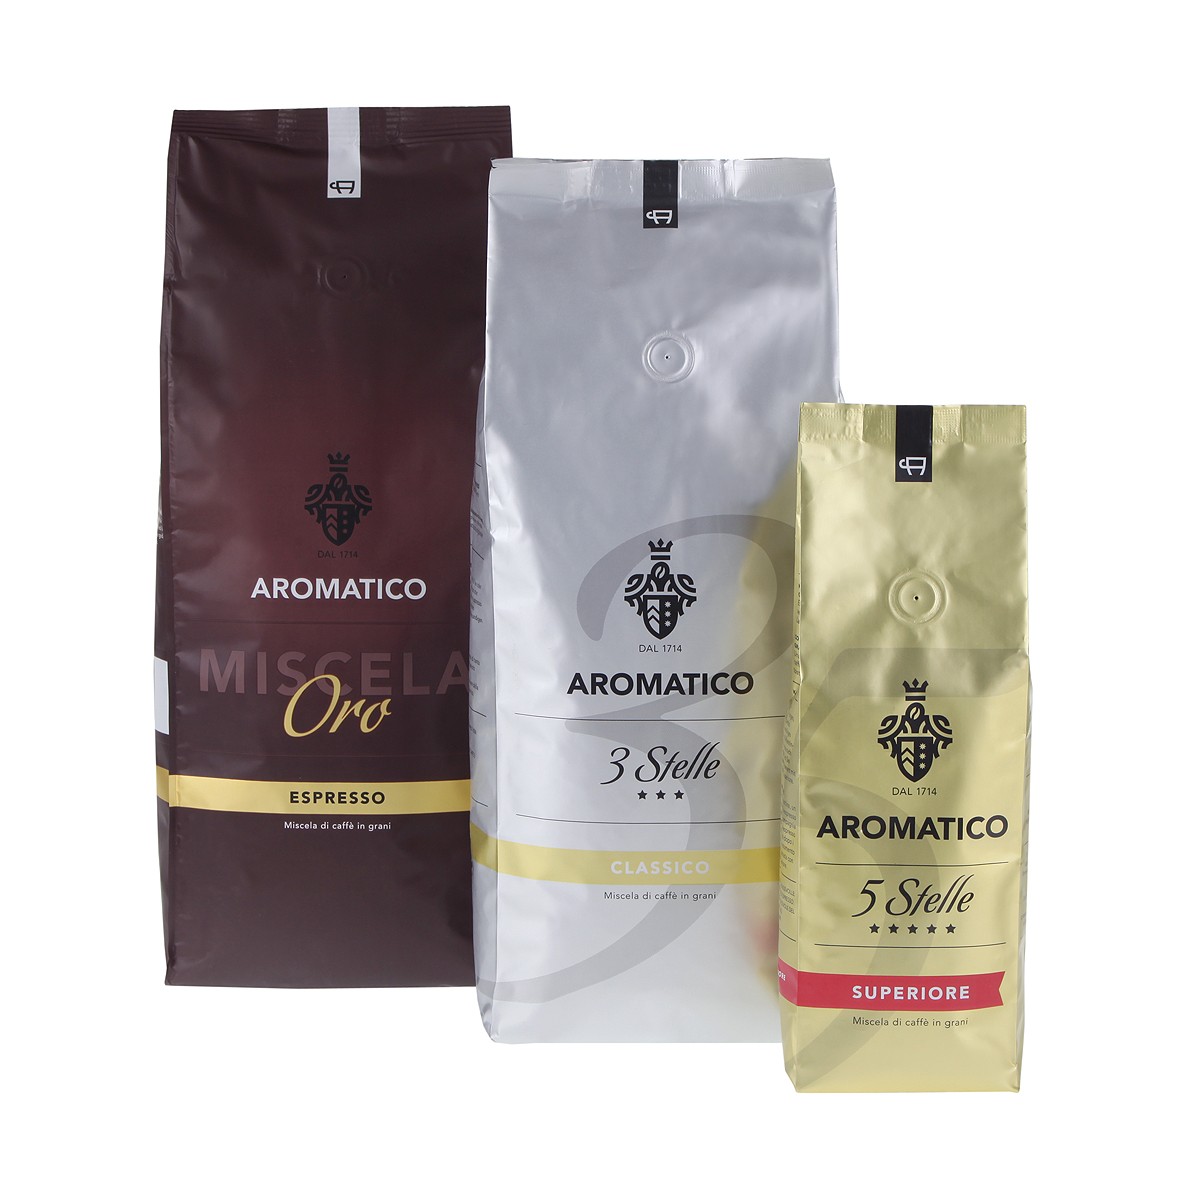 Aromatico Tasting Package